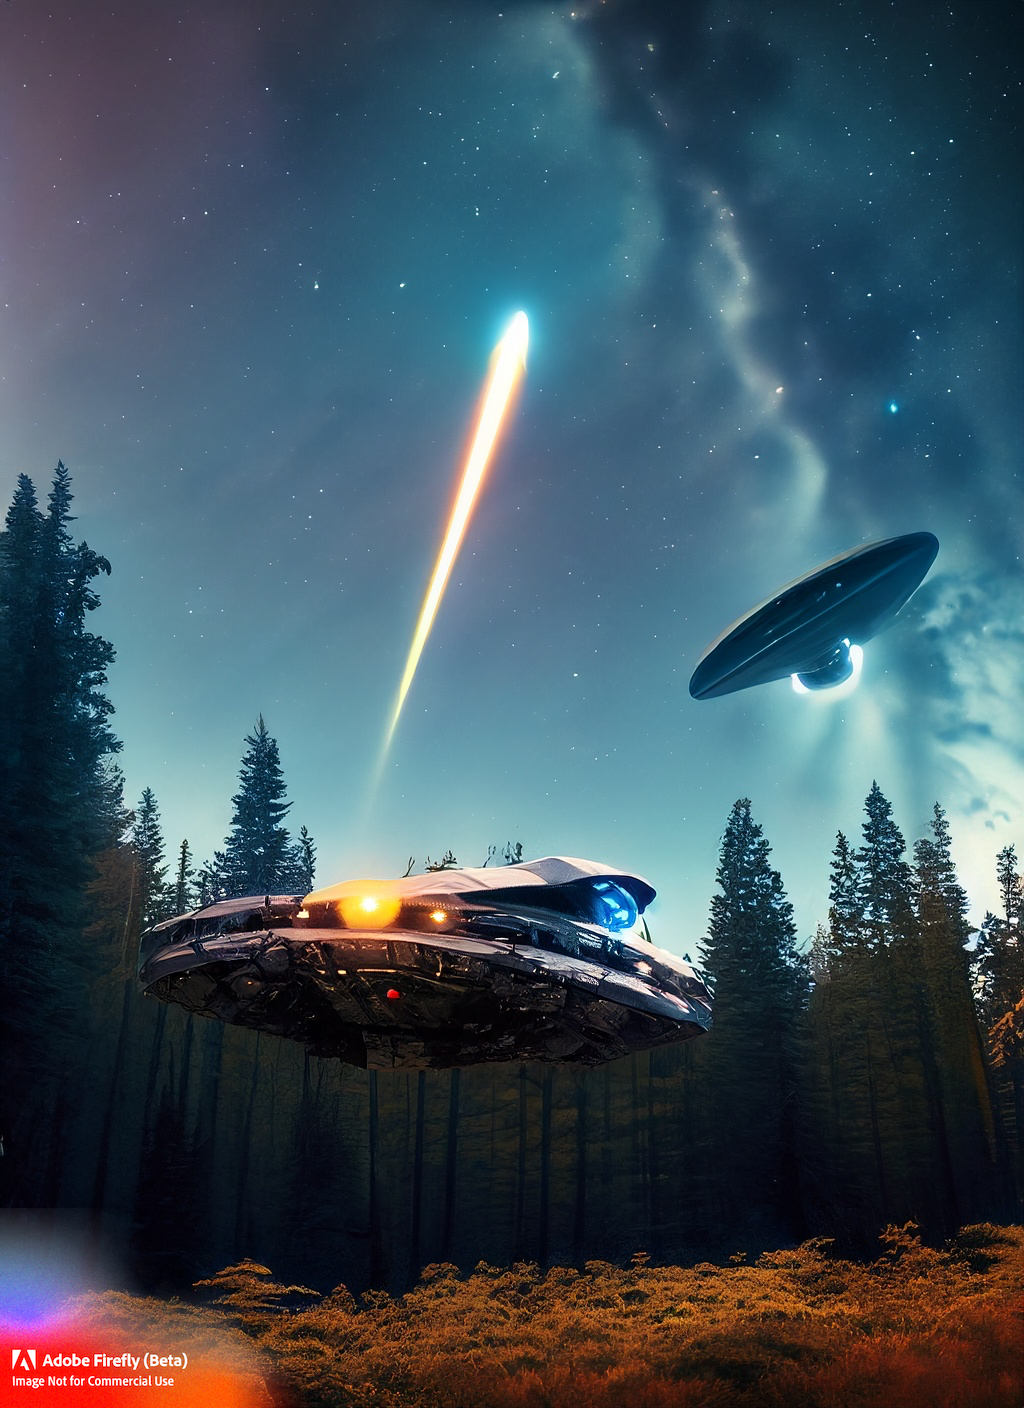 Firefly spaceship hovering in the Scandinavian forest night sky 67281